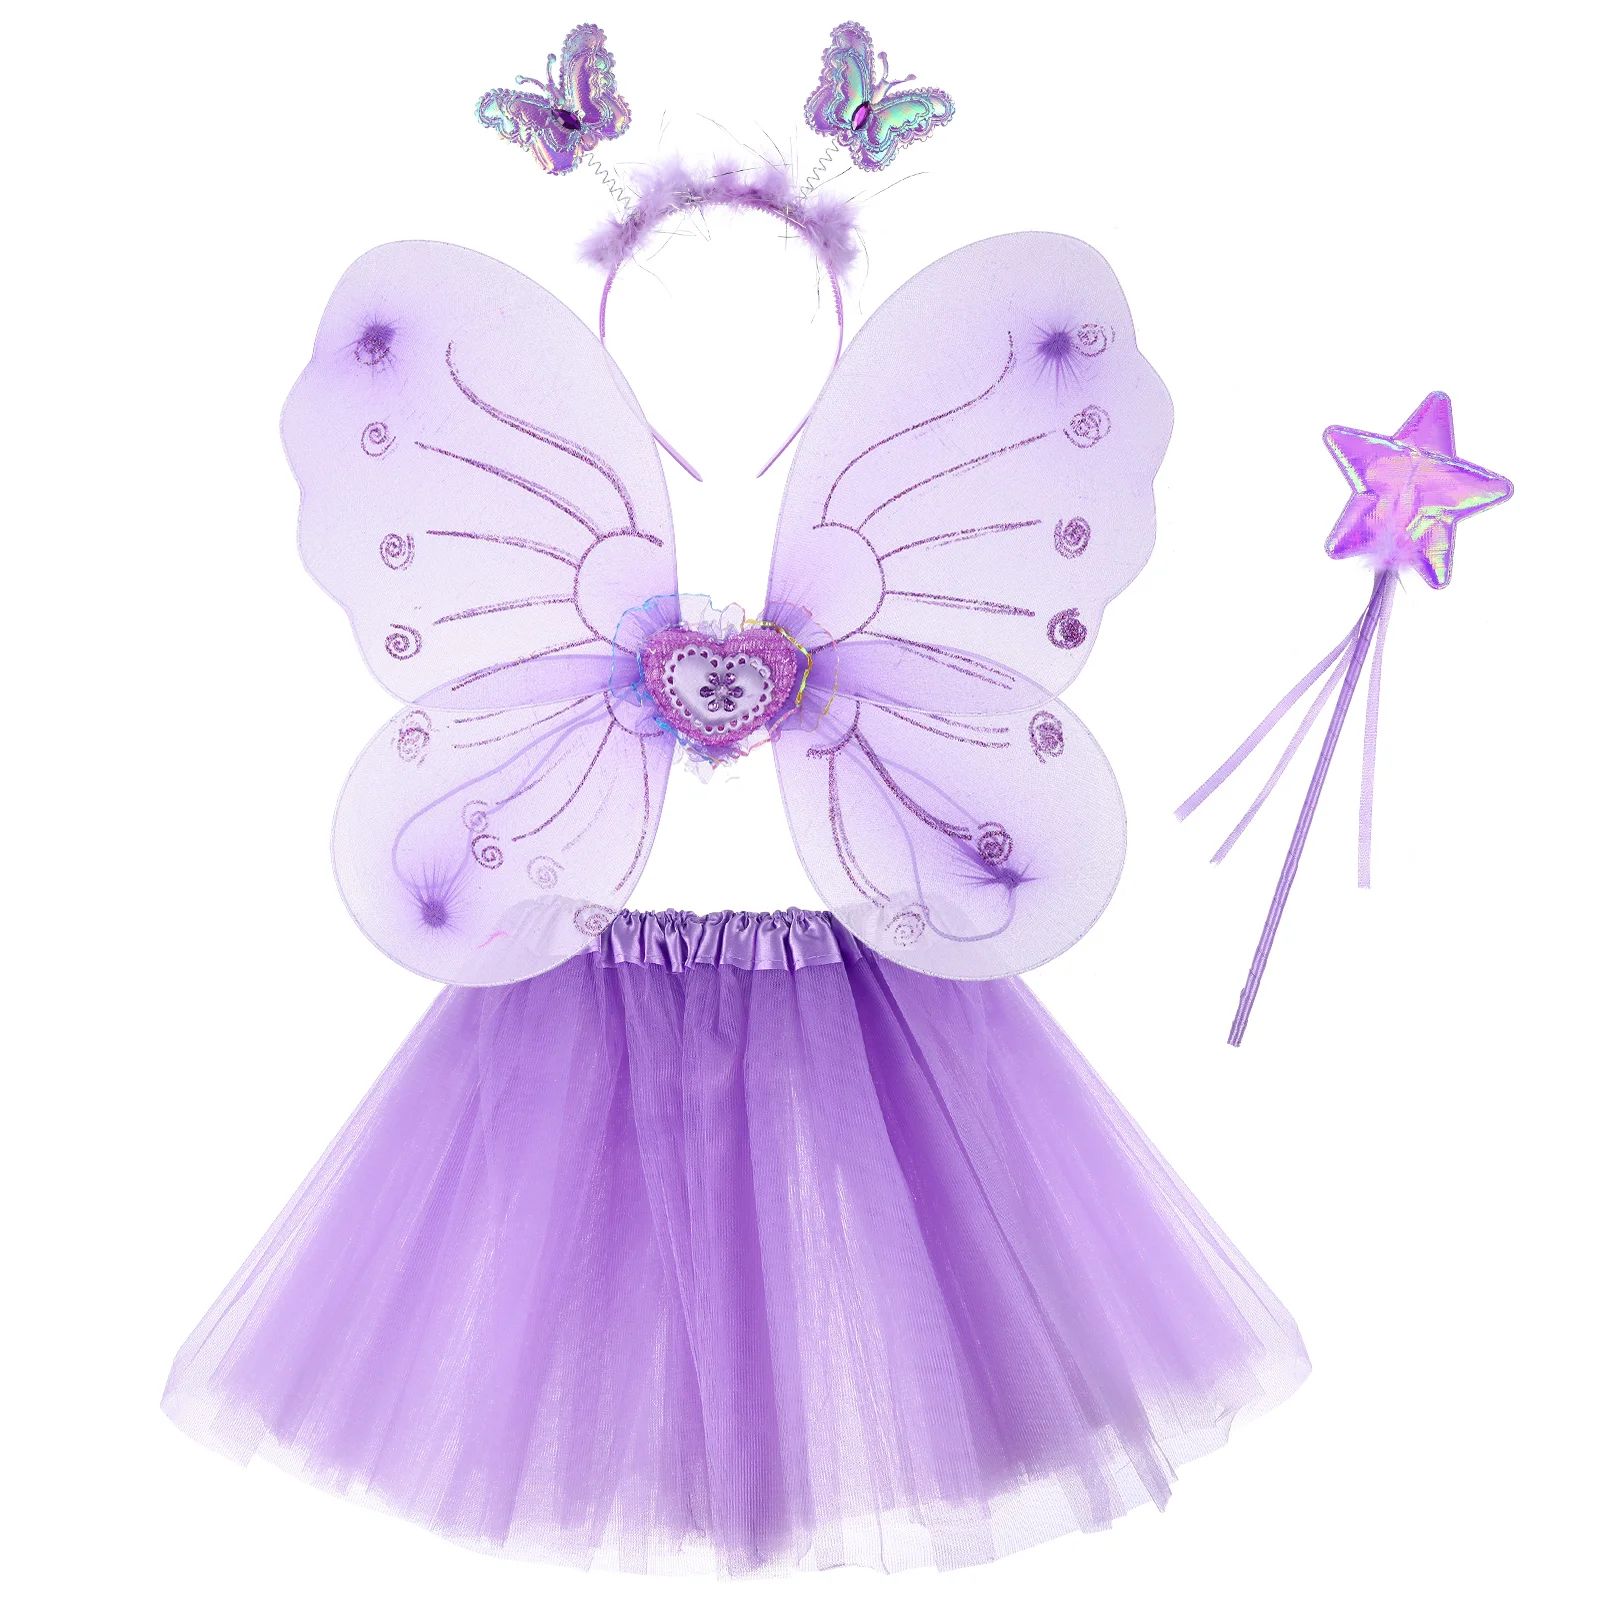 

Butterfly Wings Four Piece Set Mesh Tutu Skirt Dress Girl Fairy Girl's Clothing Fabric Wand Accessories Outfits Teen Girls